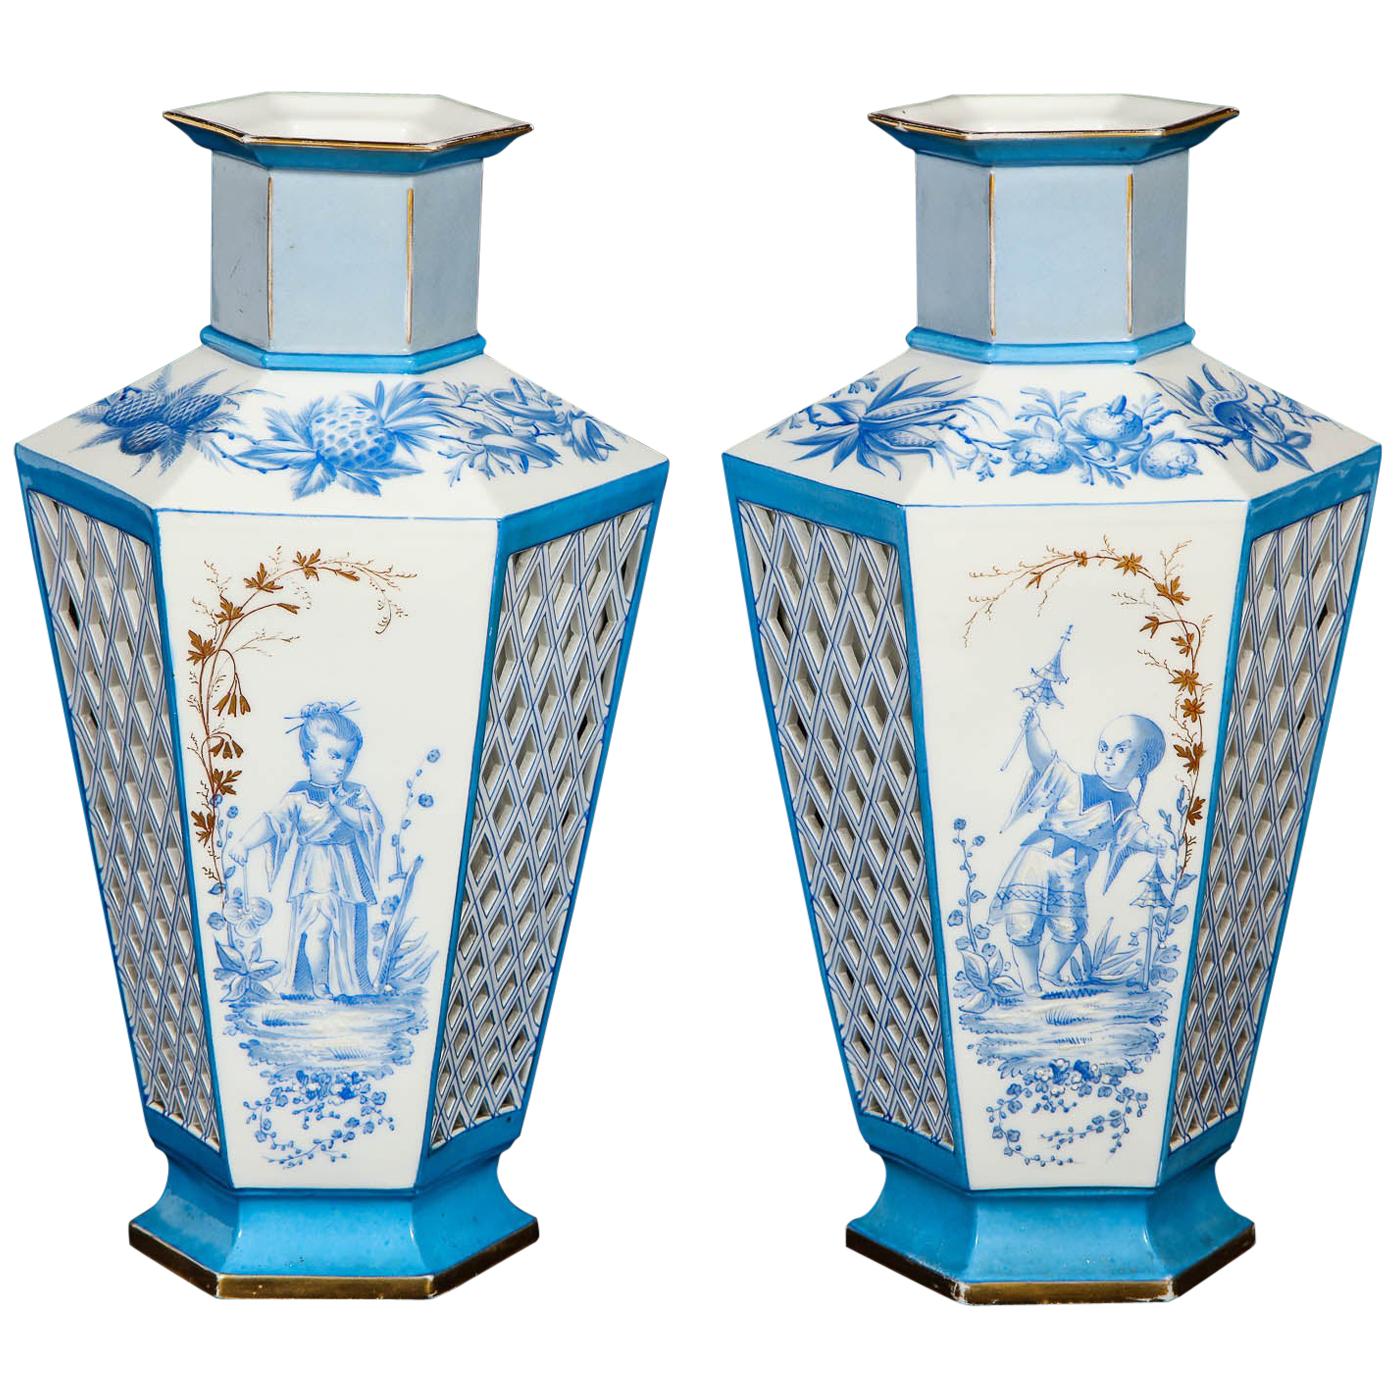 Pair of French Paris Porcelain Blue and White Chinoiserie Style Open-Work Vases